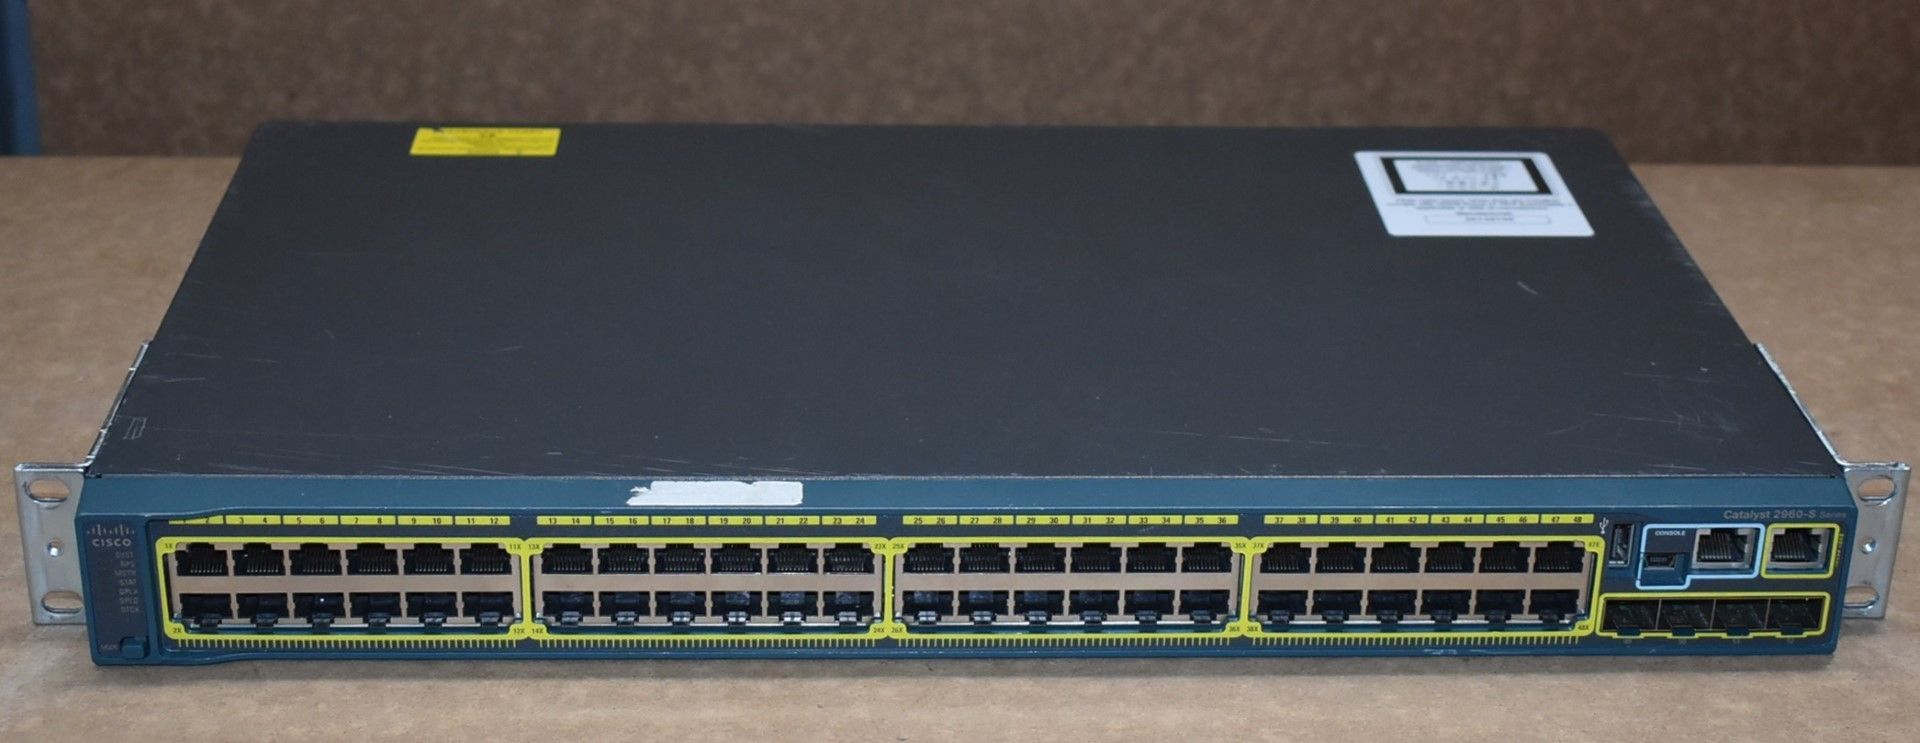 1 x Cisco Catalyst 2960S 48 Port Switch - Includes Power Cable - Ref: MPC114 CA - CL678 -